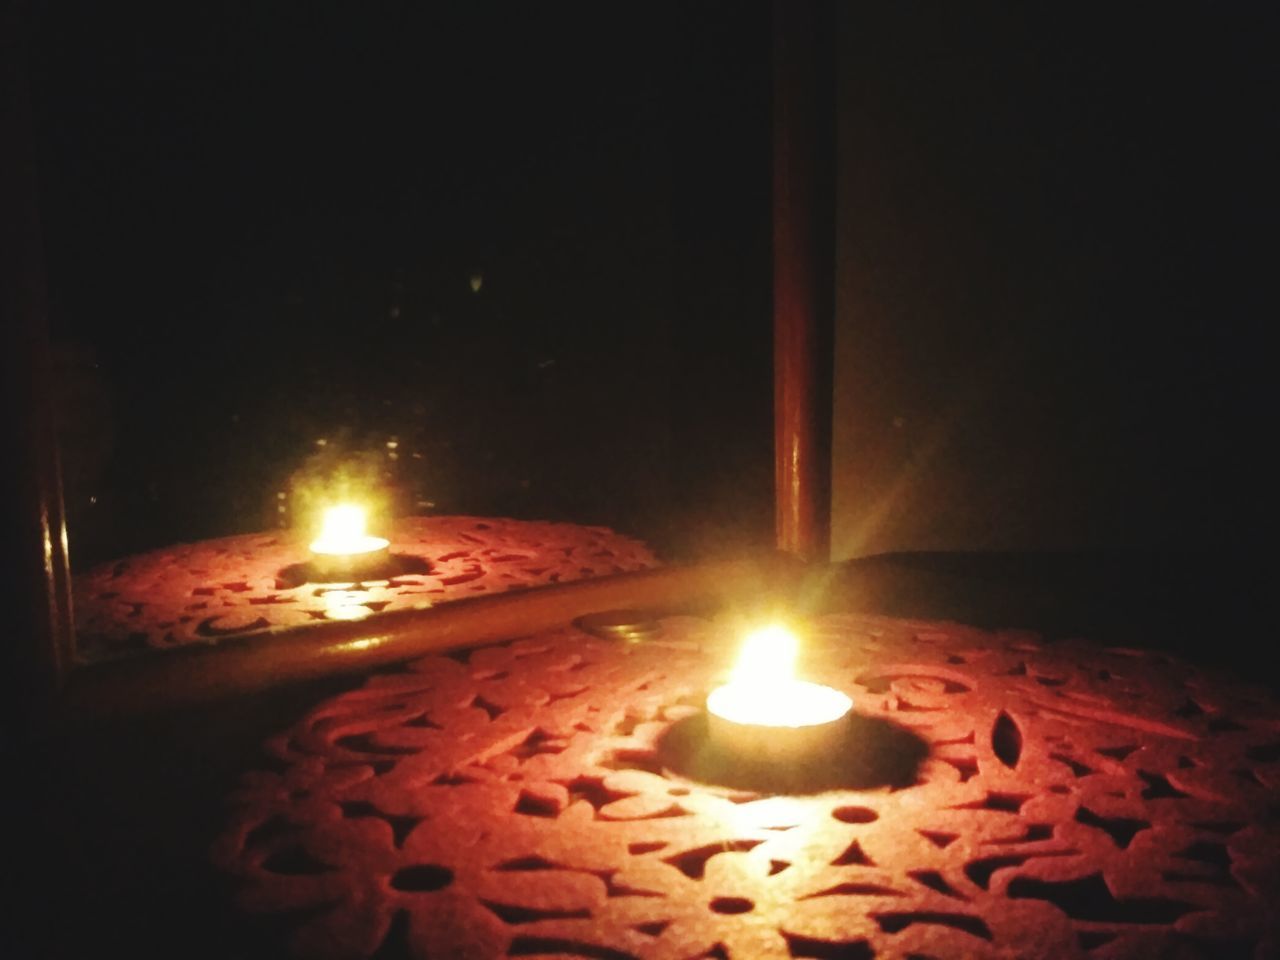 burning, flame, fire, heat - temperature, fire - natural phenomenon, illuminated, no people, candle, night, indoors, nature, glowing, close-up, lighting equipment, oil lamp, light - natural phenomenon, diya - oil lamp, event, temptation